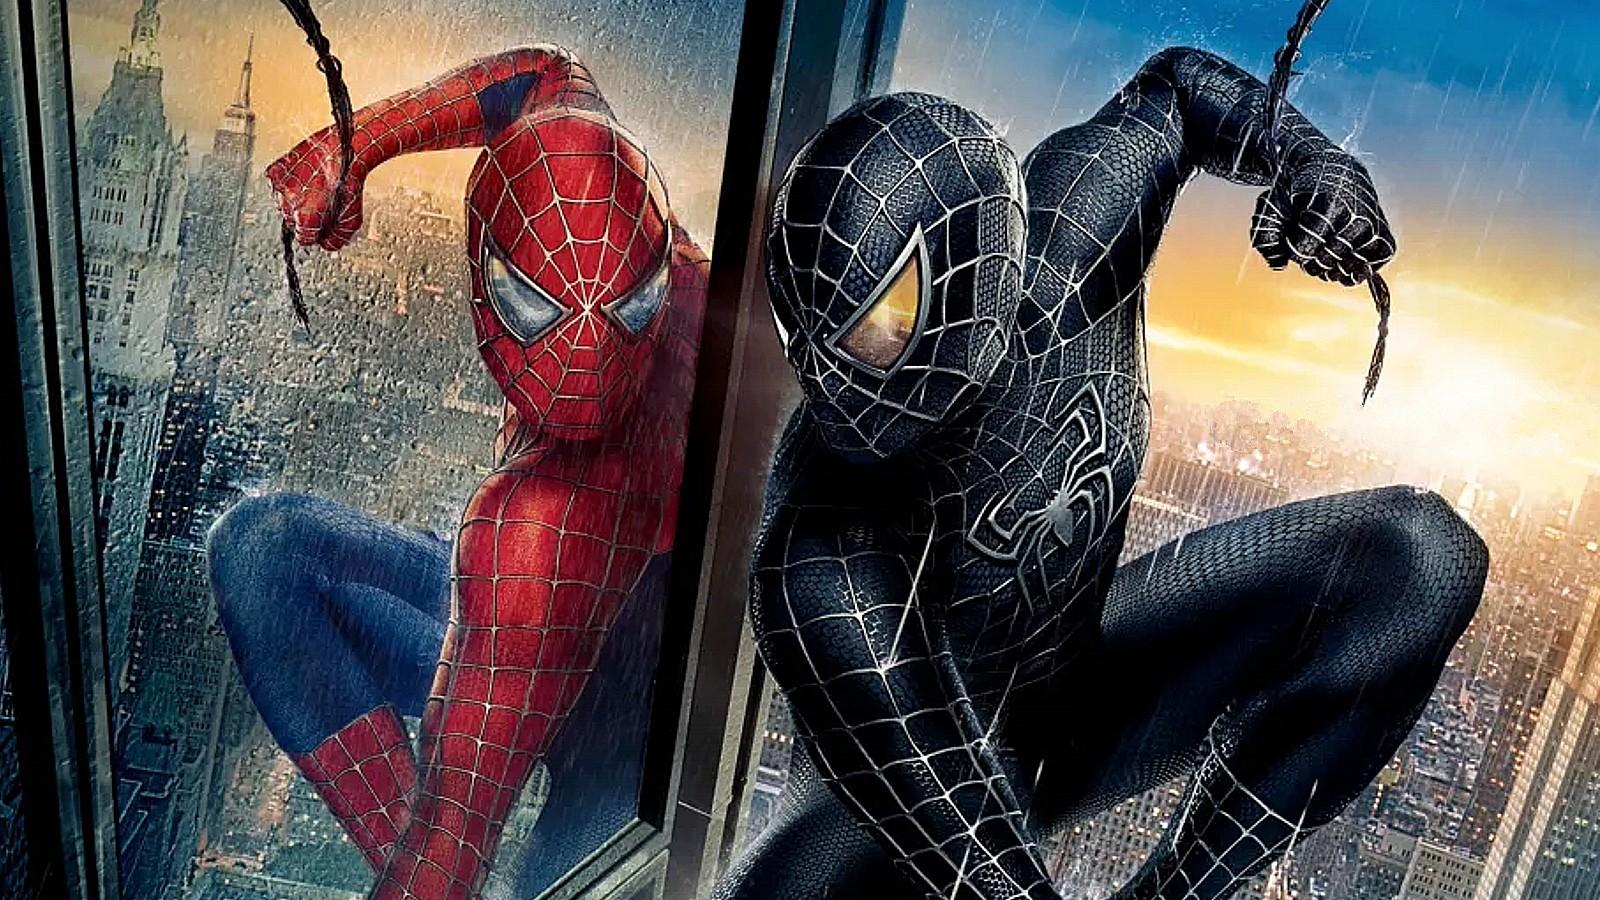 The poster for Spider-Man 3